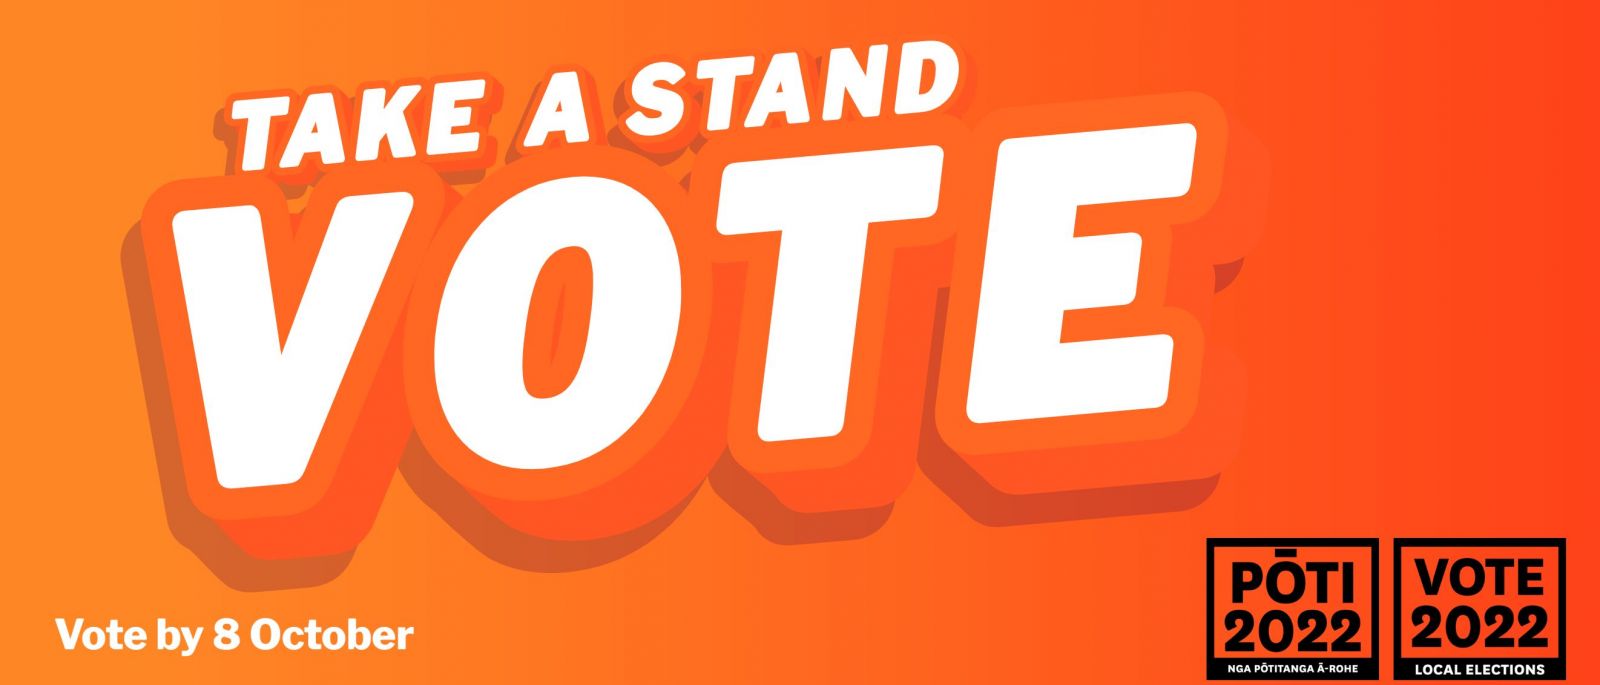 Elections - Vote banner image